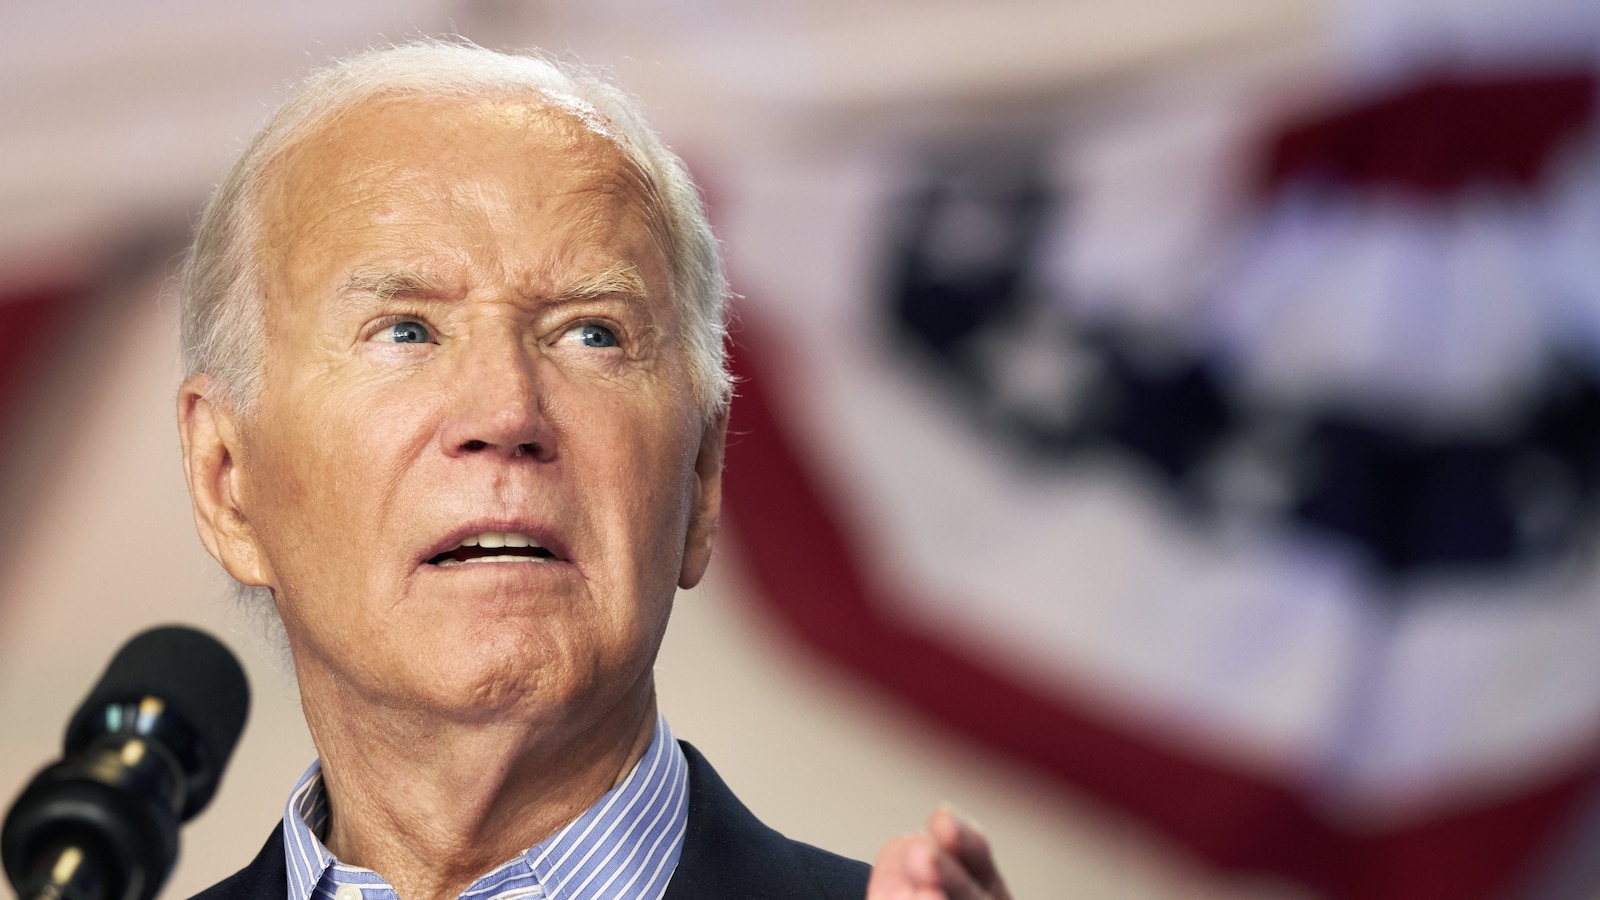 Republicans want to hear shielded interview tapes of Biden. Here’s what we know about the recordings